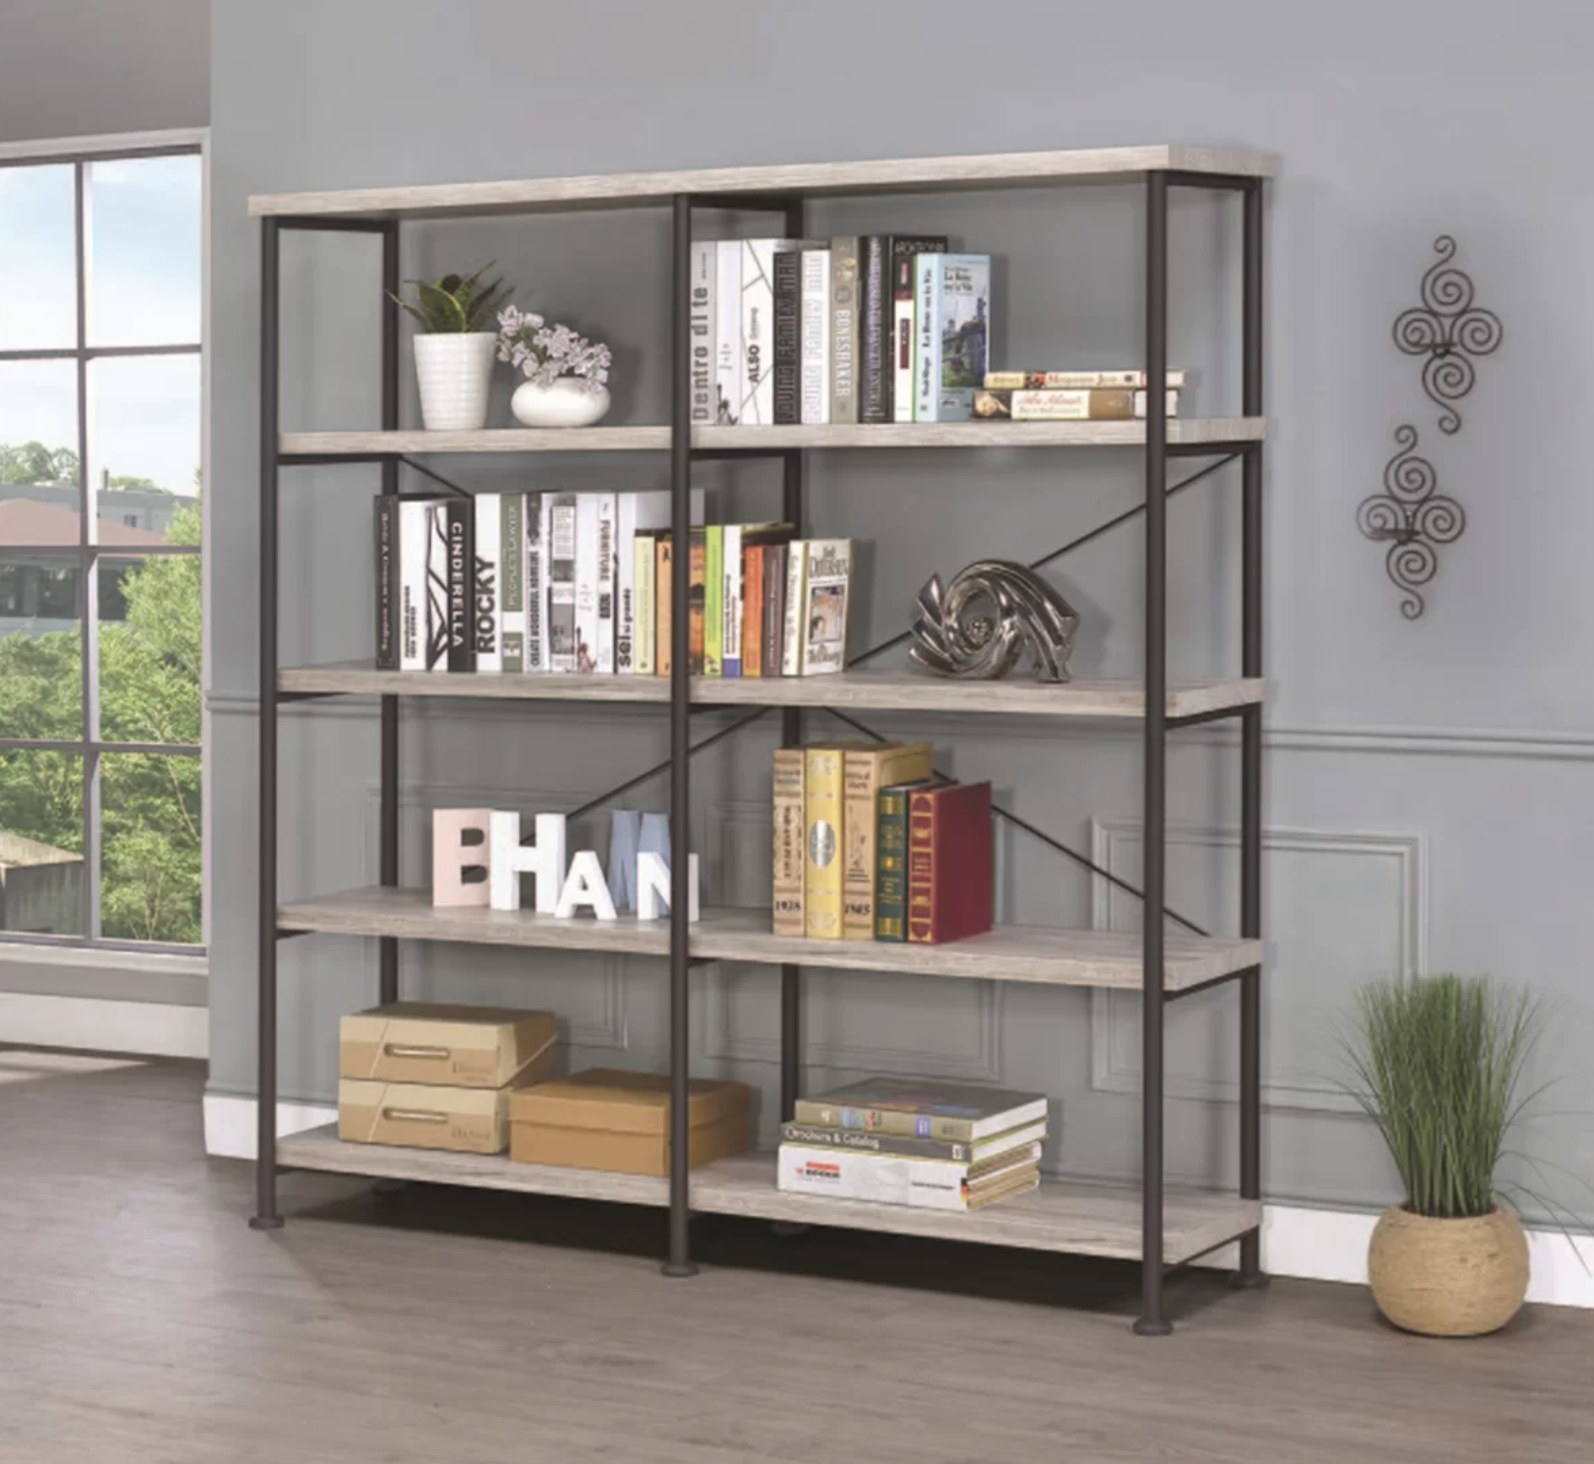 The bookcase in gray driftwood